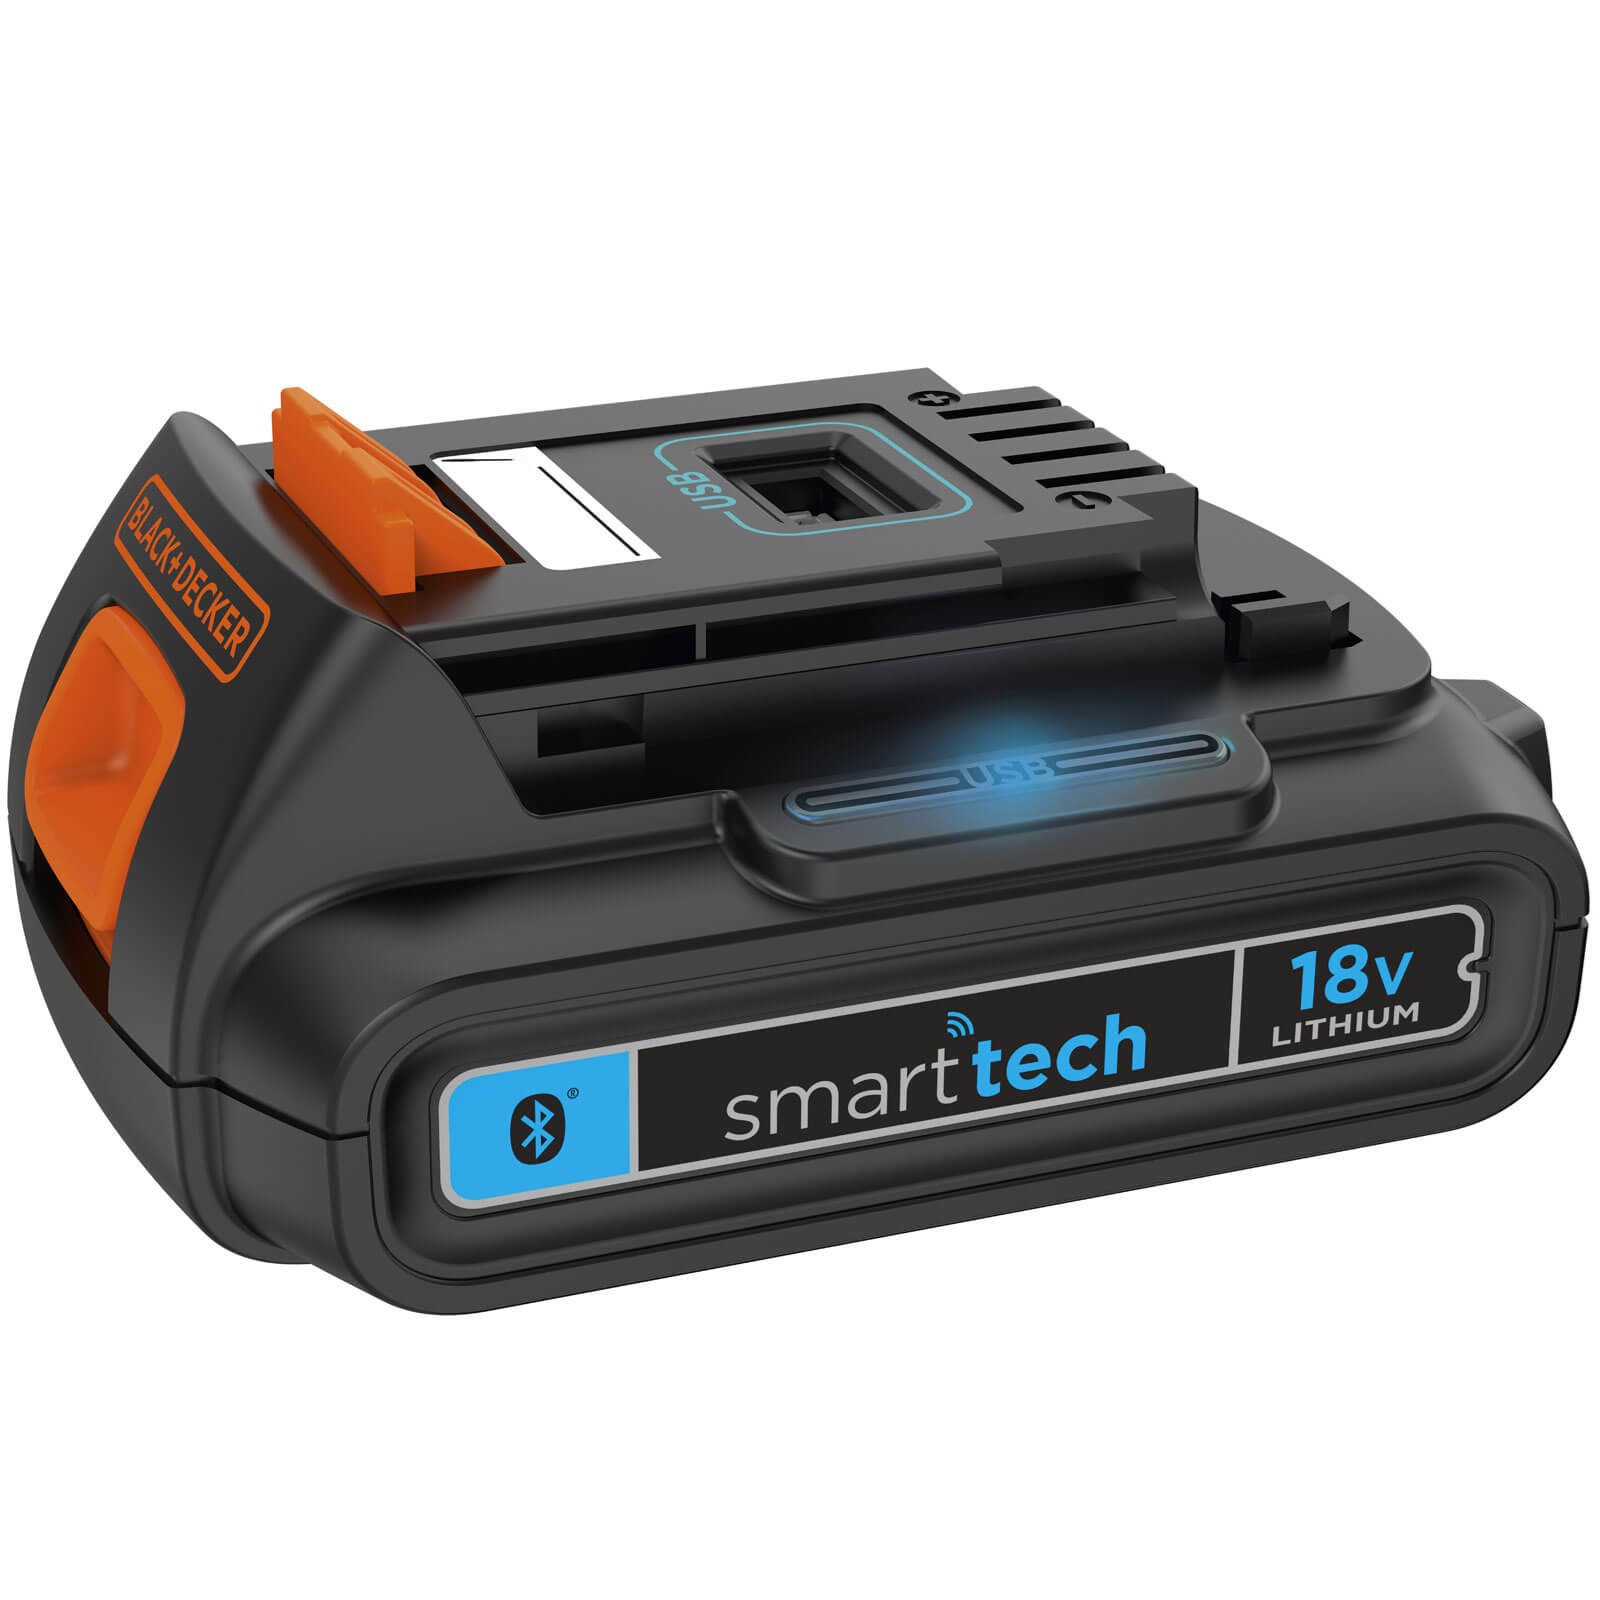 Black and Decker Genuine 18v Li-ion Battery and Charger Pack 1.5ah